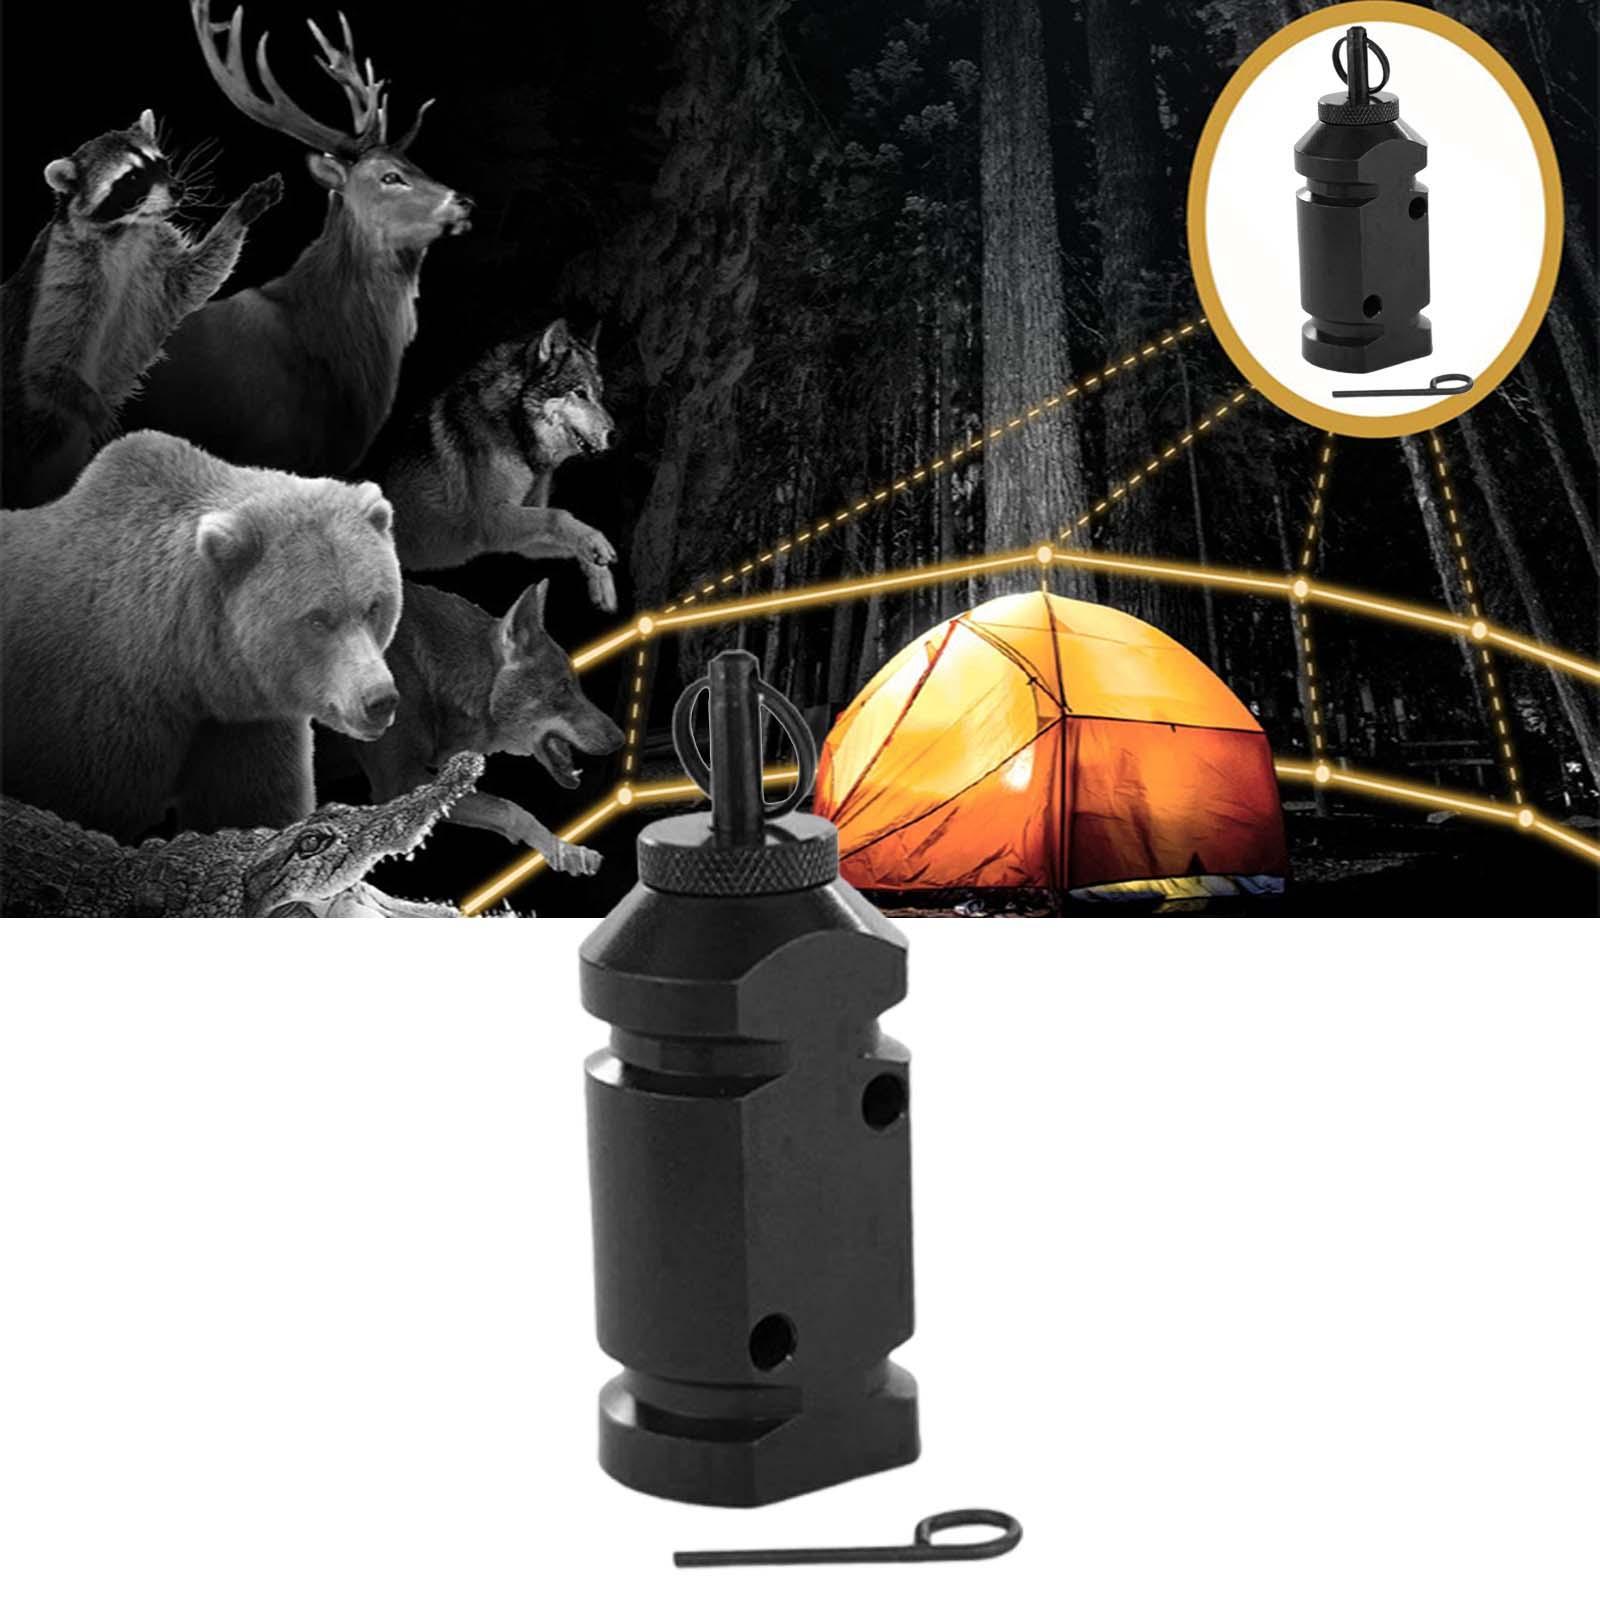 Trip Alarm Convenient Aluminum Alloy for Backpacking Emergency Backyard